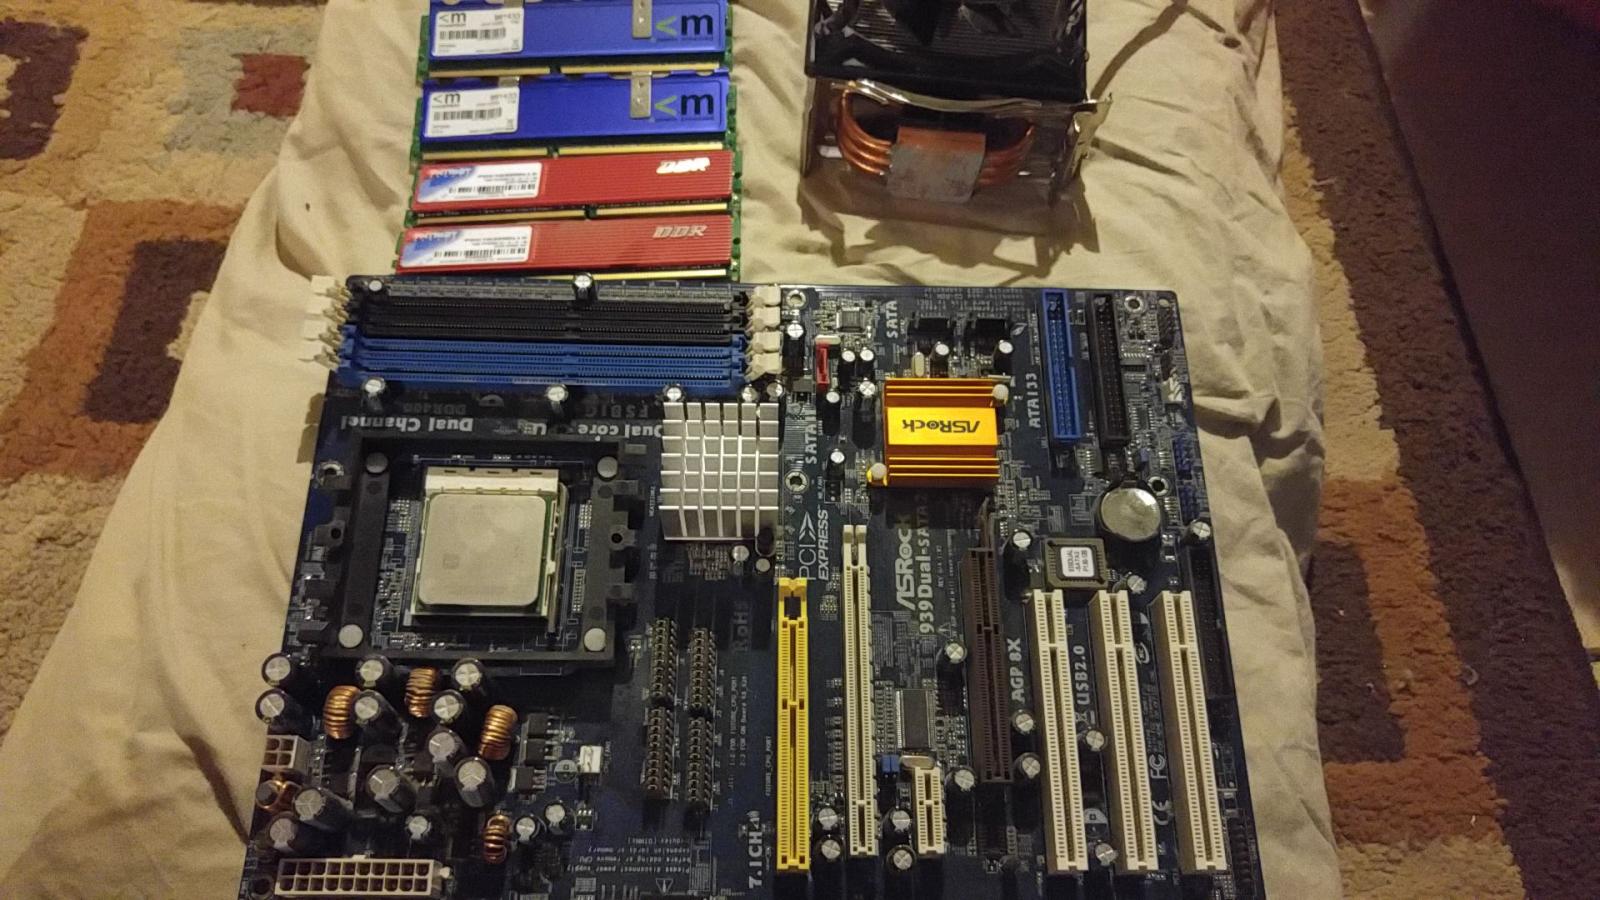 For sale 939 mobo with x2 4200, 3000 fan and 2gb ram